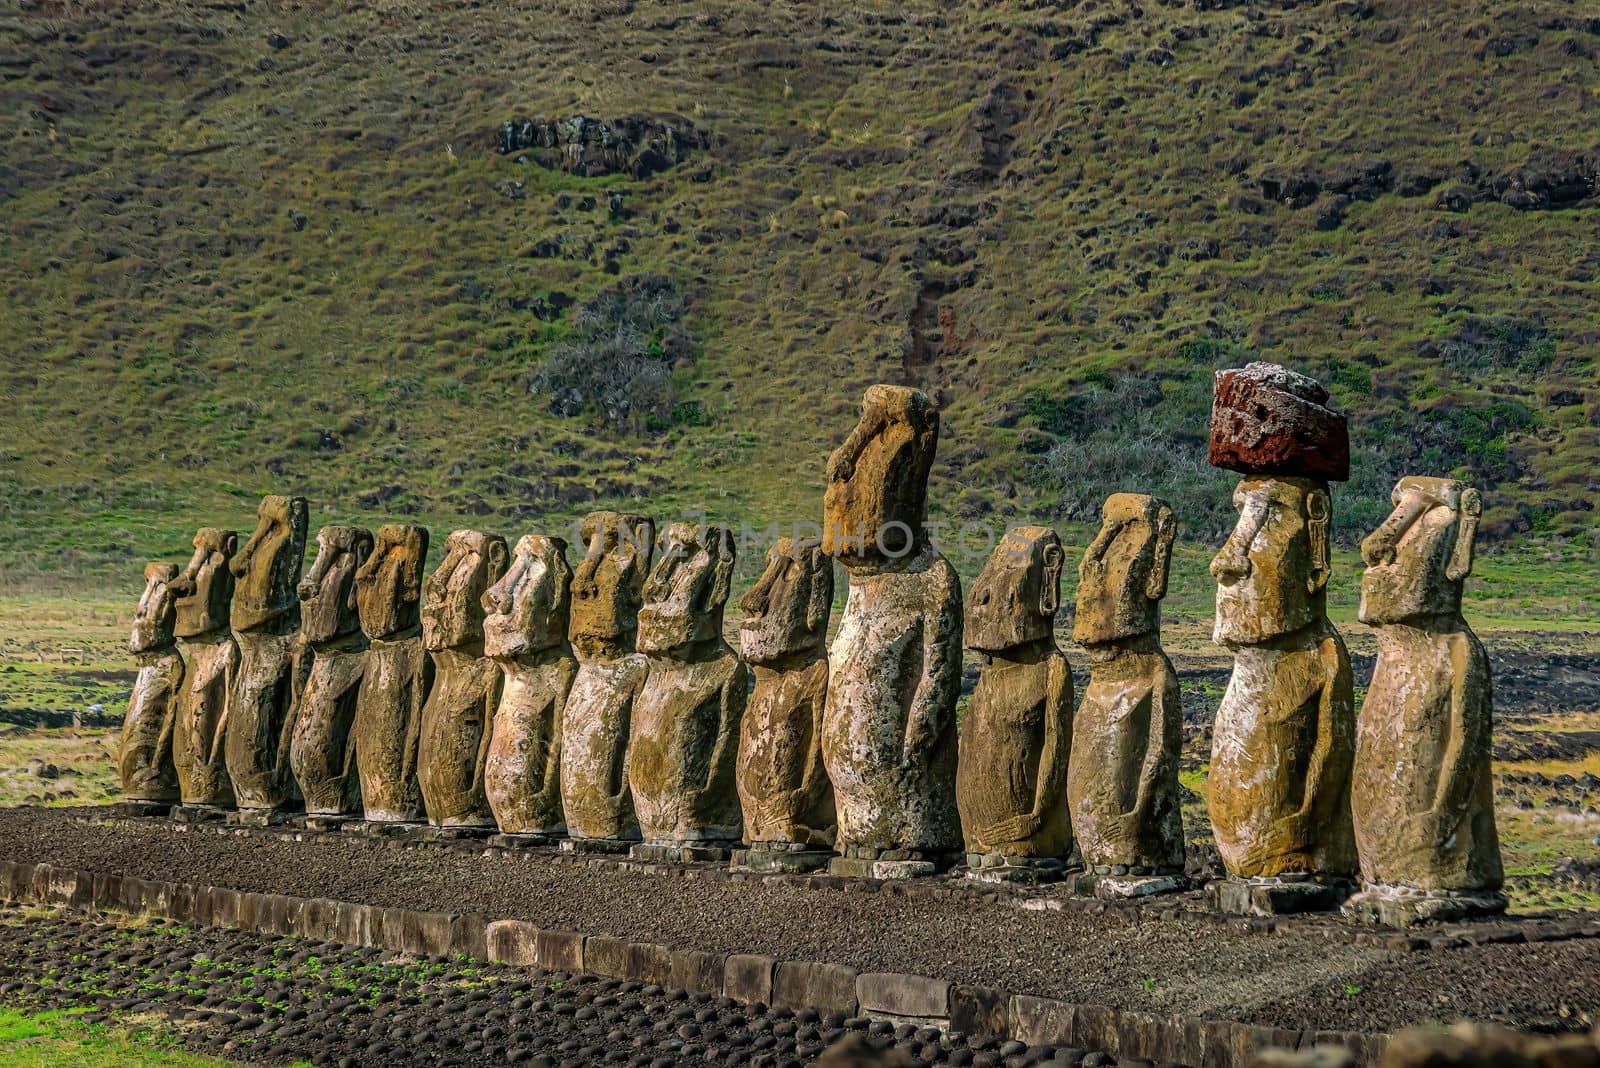 The ancient moai of Ahu Togariki, on Easter Island of Chile